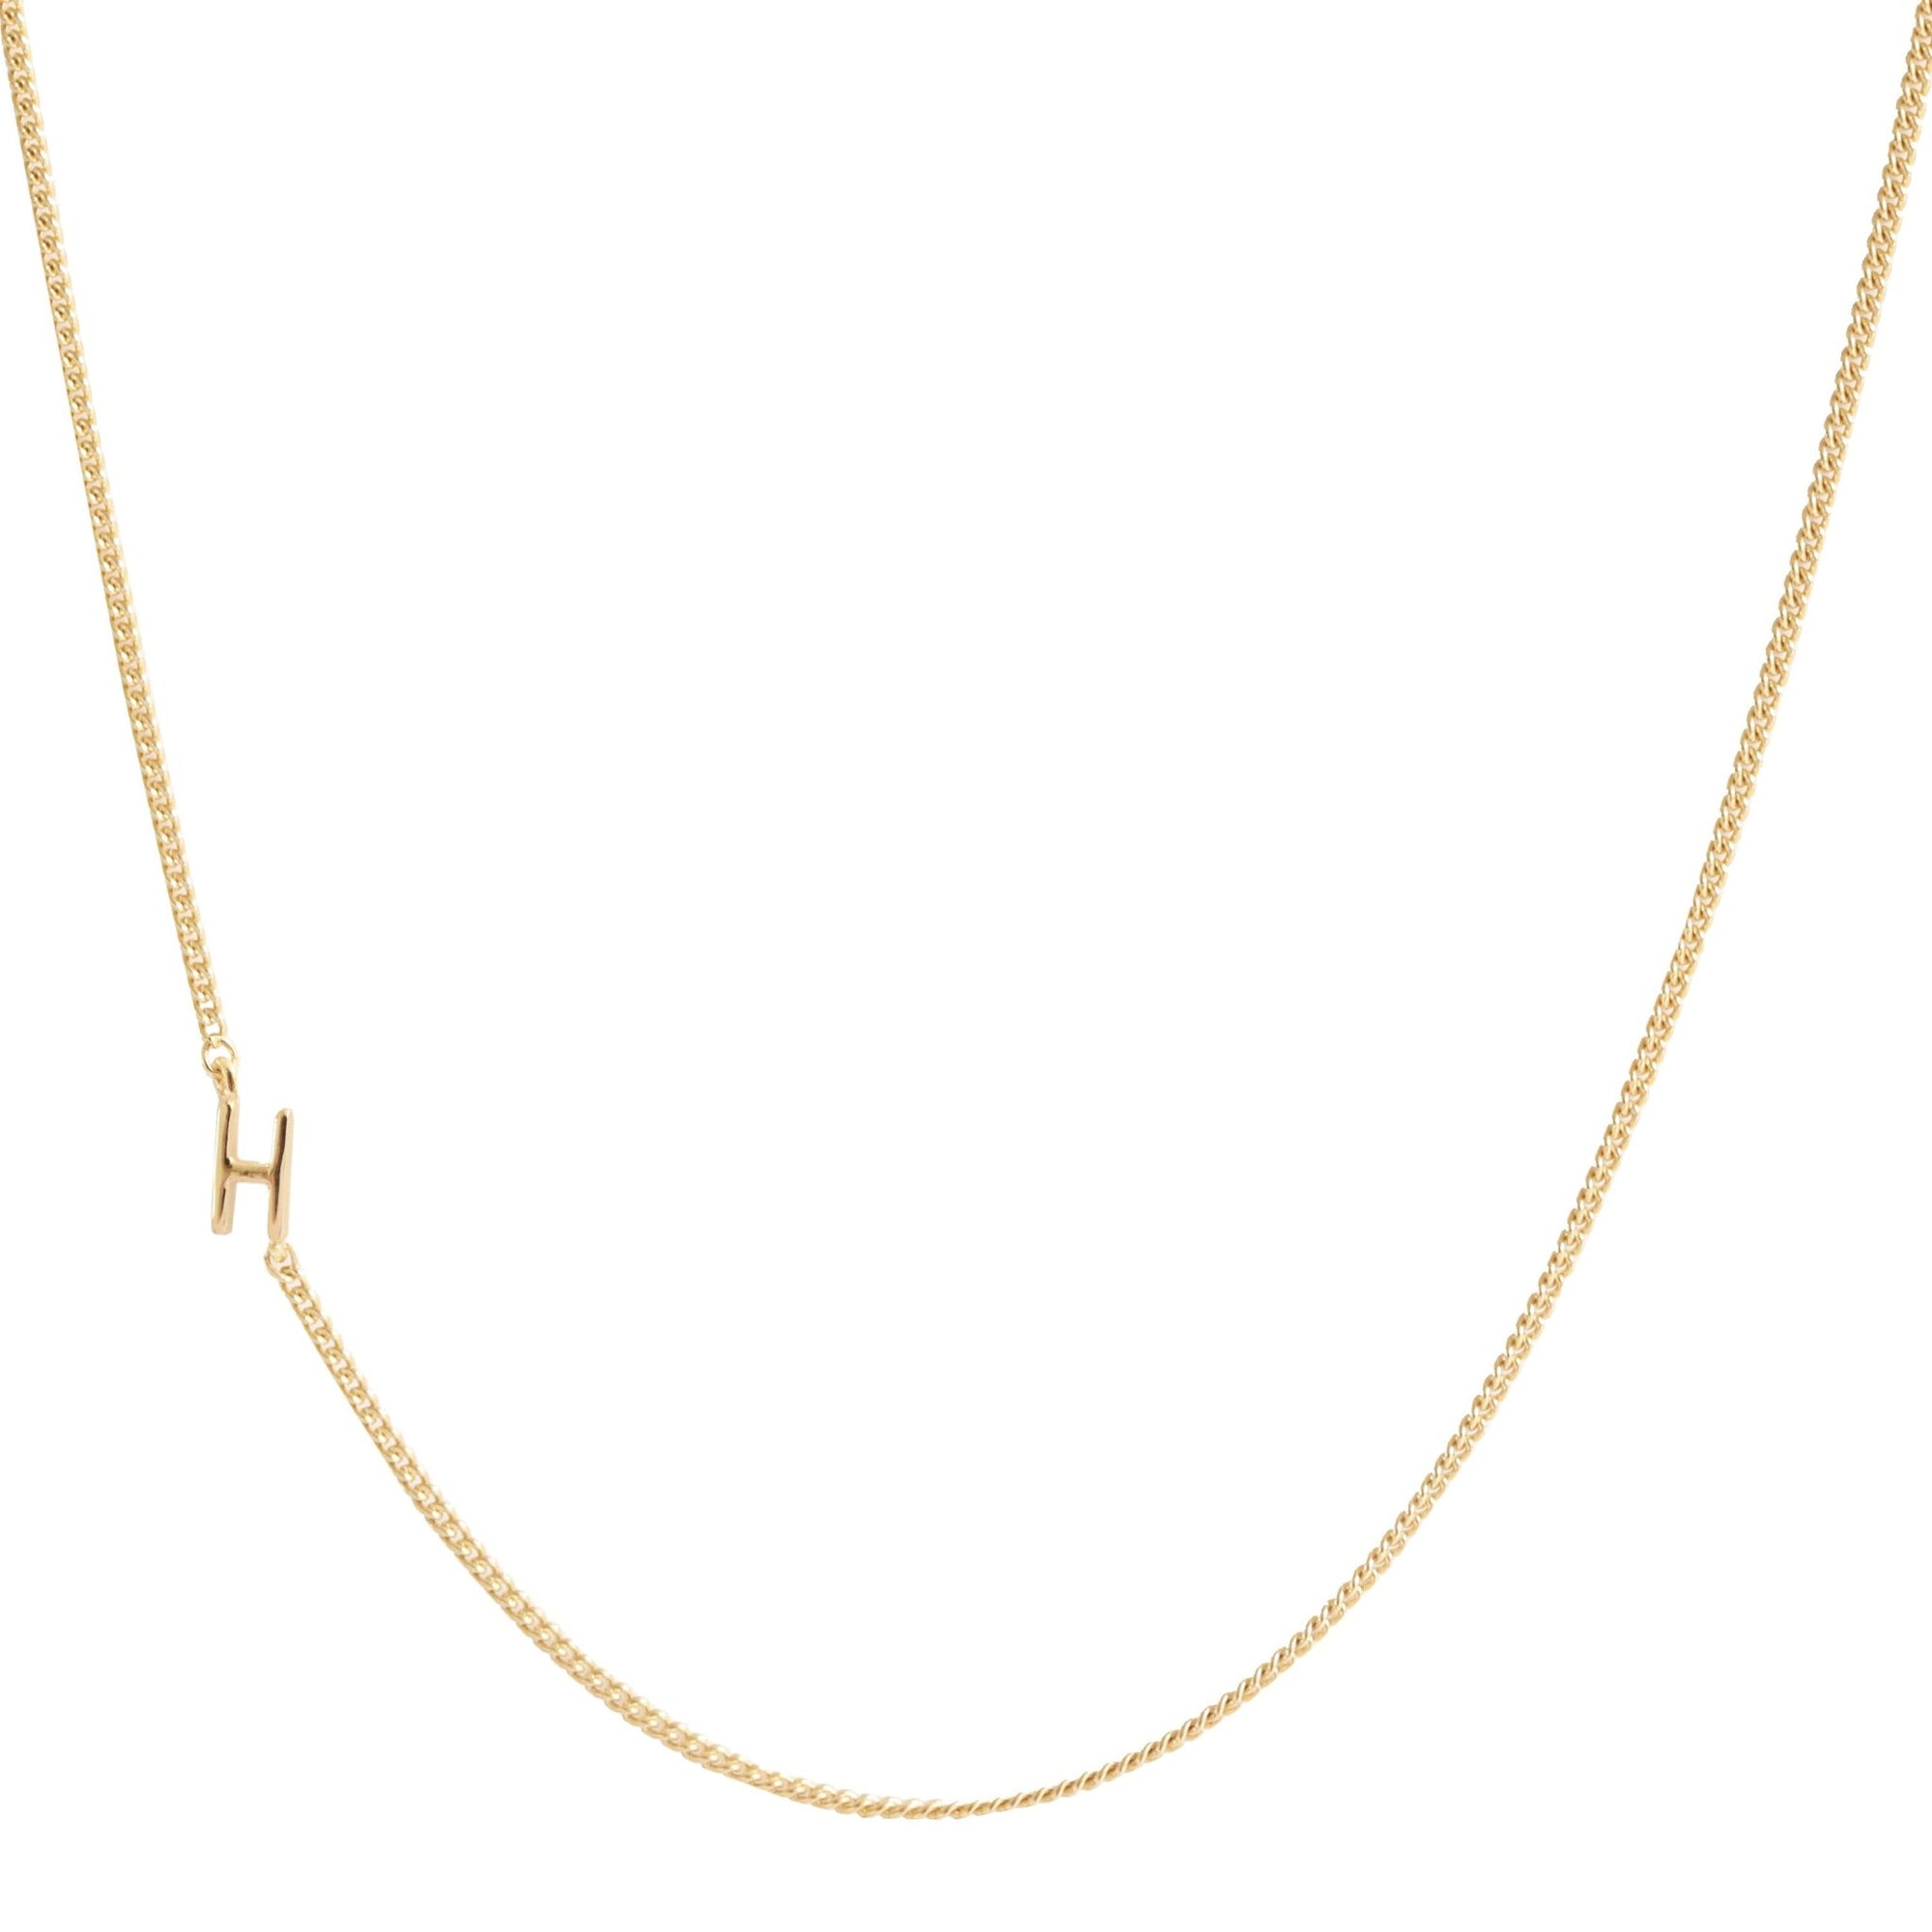 NOTABLE OFFSET INITIAL NECKLACE - H - GOLD - SO PRETTY CARA COTTER